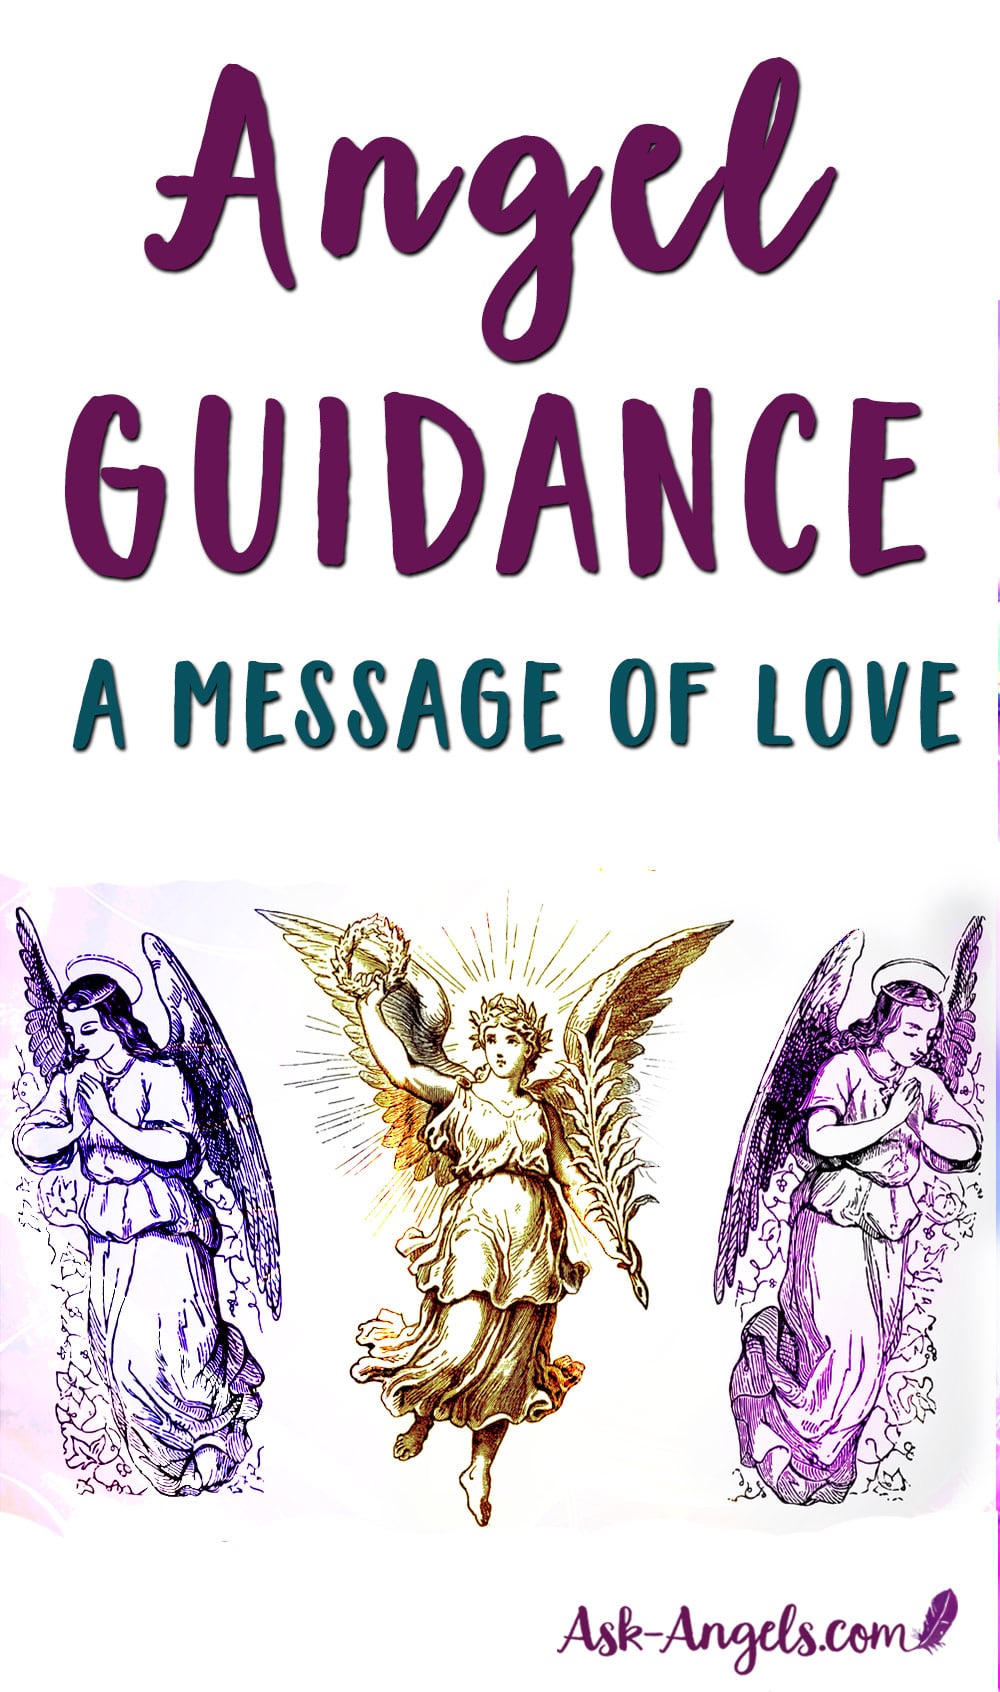 Angel Guidance - A Message of Love